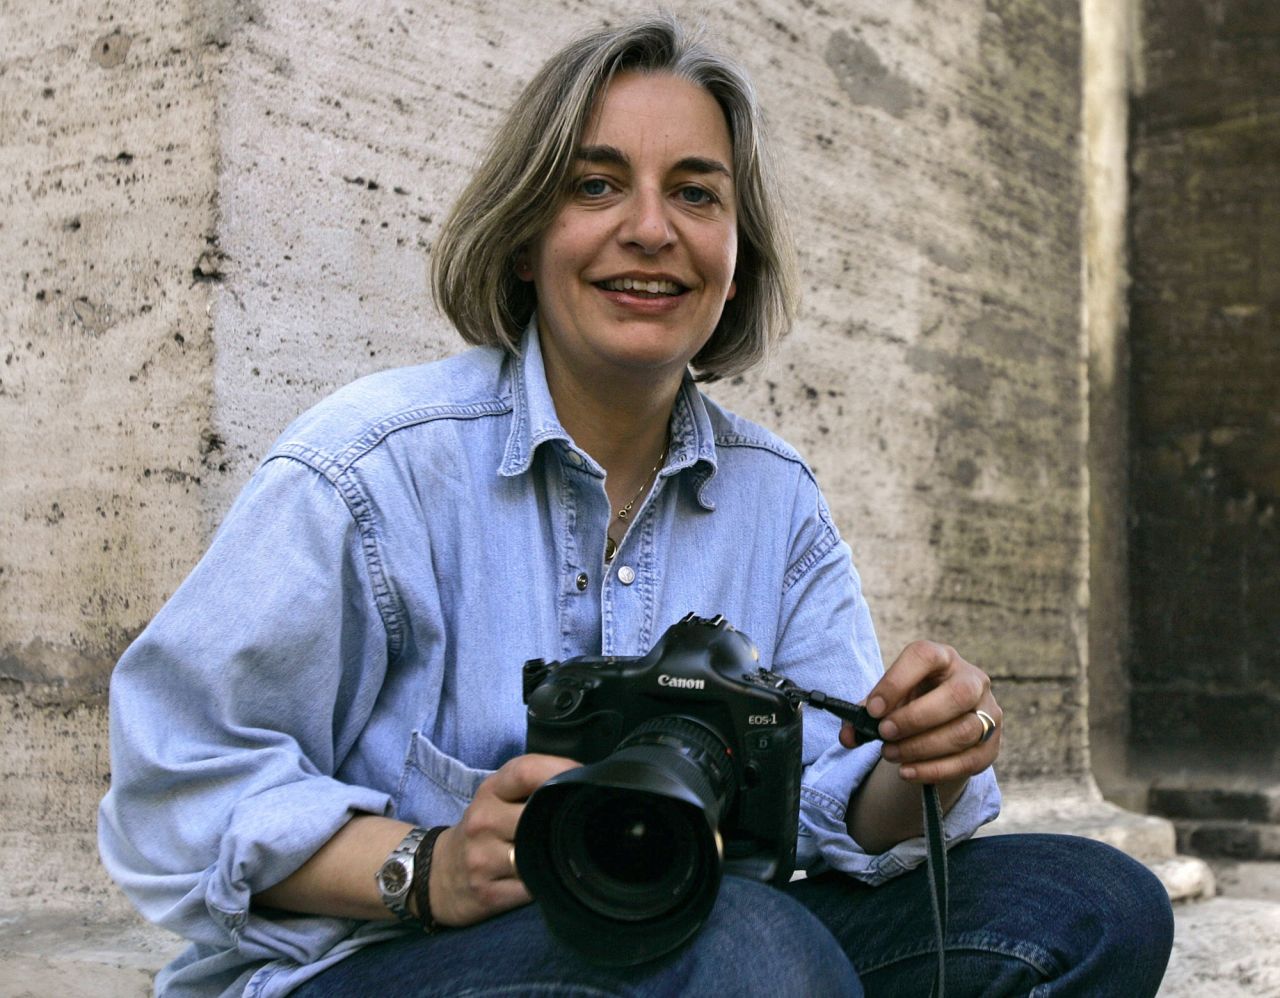 Anja Niedringhaus was a German photojournalist who worked for the Associated Press. She was killed in 2014 while covering Afghanistan's presidential election. An Afghan police officer opened fire on her and her colleague, Kathy Gannon, while they were waiting inside a car. Gannon survived the attack. "Anja showed a side of Afghanistan that few have ever seen. It's just a devastating loss," <a href="https://time.com/3388127/in-memoriam-anja-niedringhaus-1965-2014/" target="_blank" target="_blank">a colleague told Time magazine.</a> Before Afghanistan, Niedringhaus worked in many conflict zones and spent a decade covering the wars in the former Yugoslavia. Santiago Lyon, who was the AP's vice president and director of photography, said Niedringhaus "consistently volunteered for the hardest assignments and was remarkably resilient in carrying them out time after time. She truly believed in the need to bear witness."